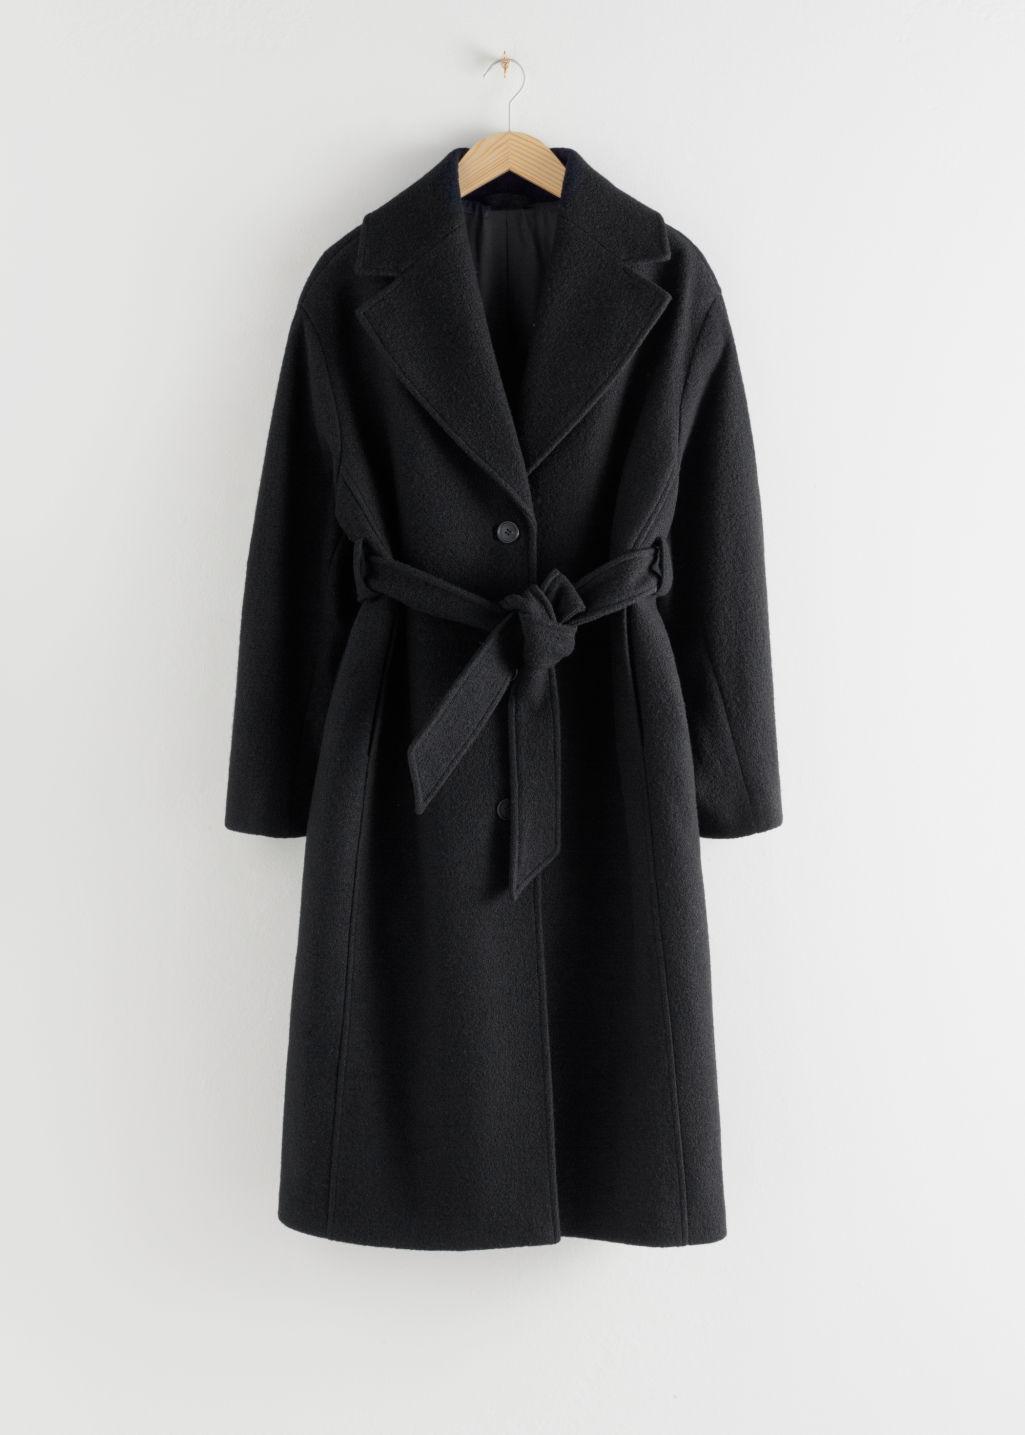 & Other Stories Oversized Belted Wool Coat in Black - Lyst